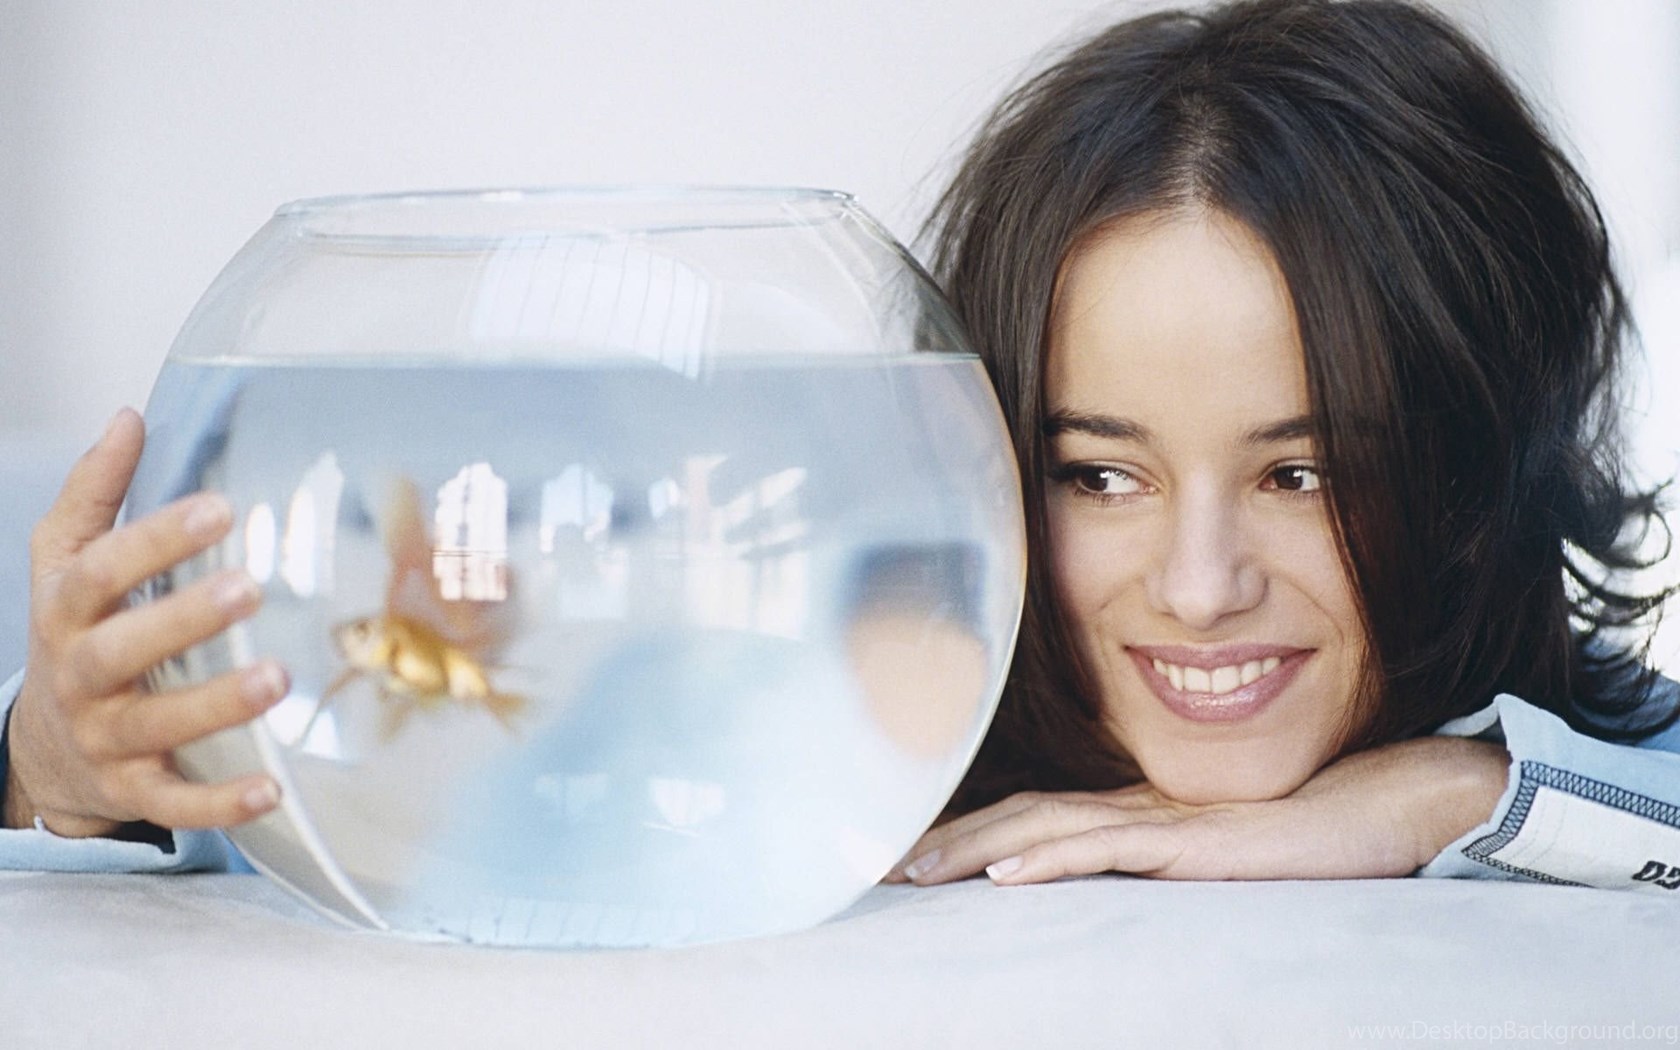 https://www.desktopbackground.org/download/1680x1050/2013/10/25/659522_sexy-alizee-1920-1440-hd-wallpapers-collection_1920x1440_h.jpg